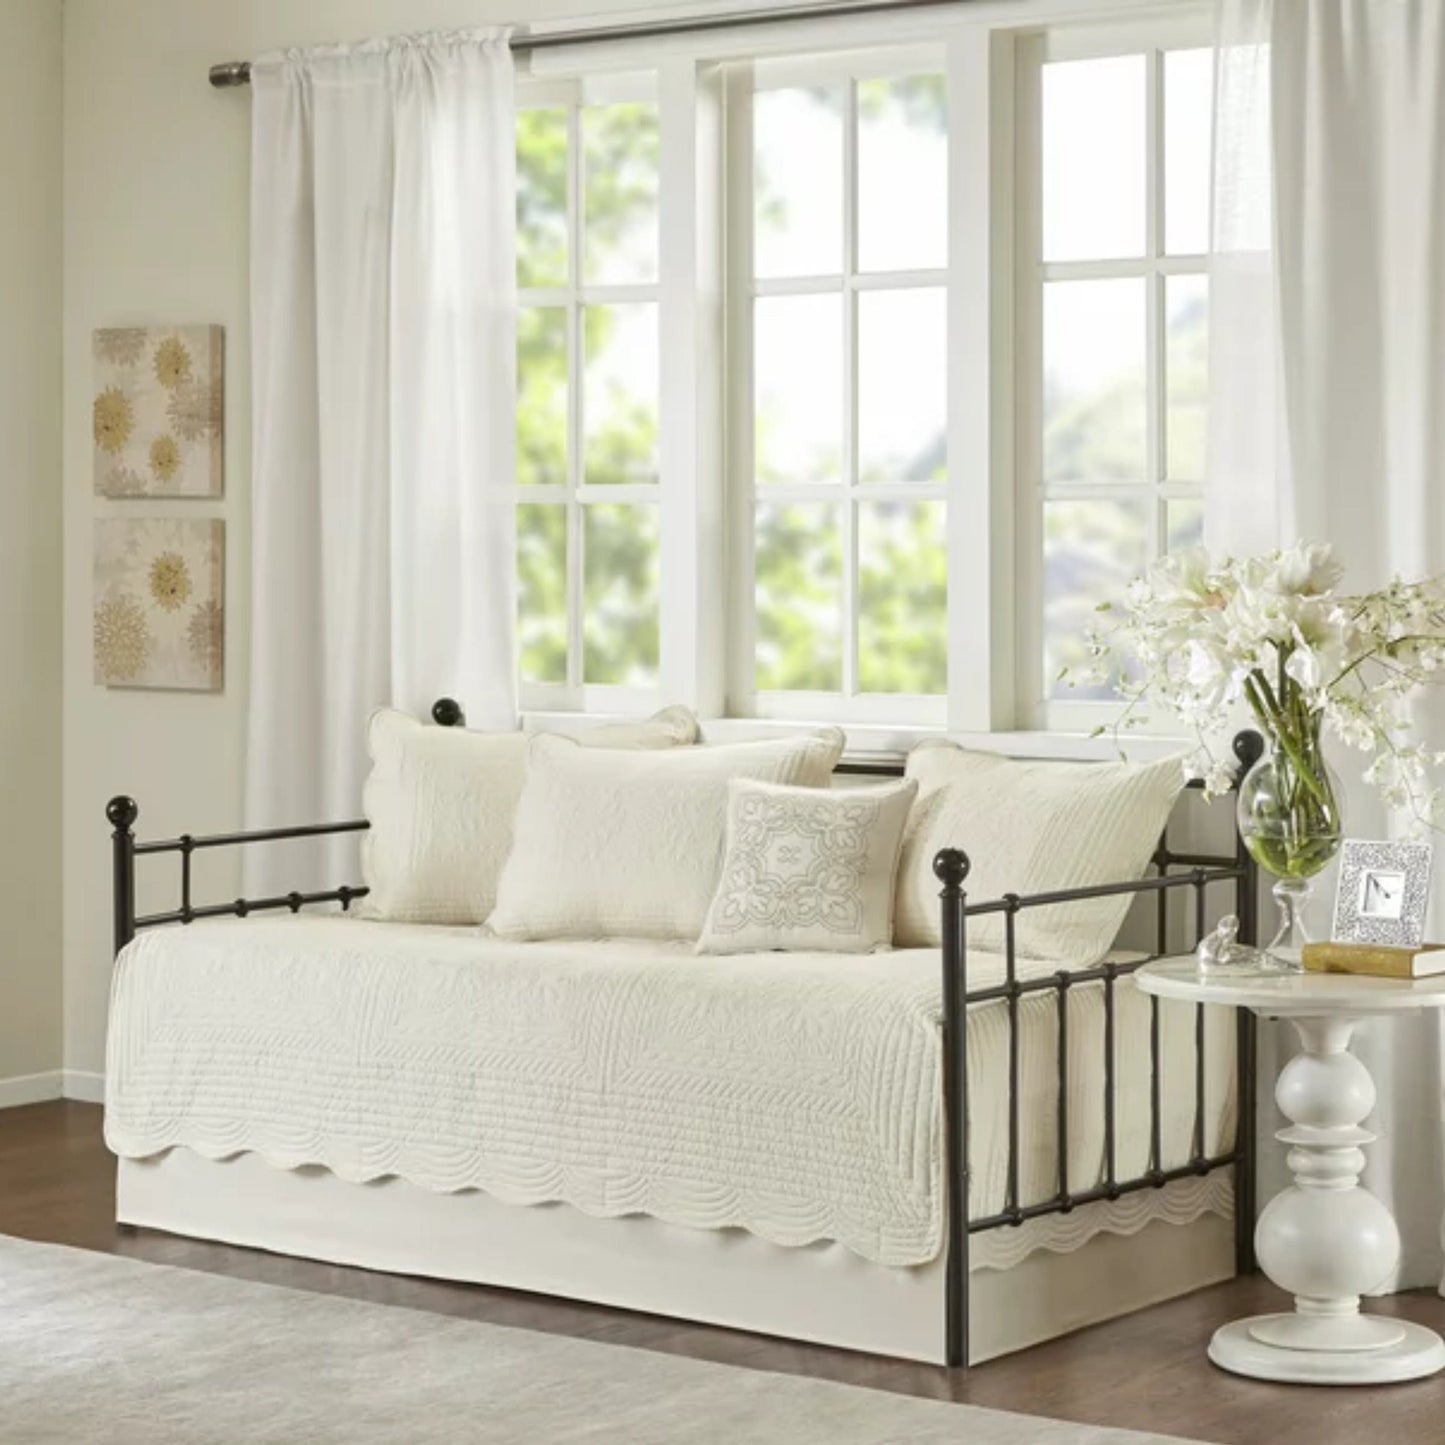 MADISONPARK Comforter/Quilt/Duvet Twin / Off-White MADISONPARK - Quilted Scalloped Edge , 6 Piece Daybed Set